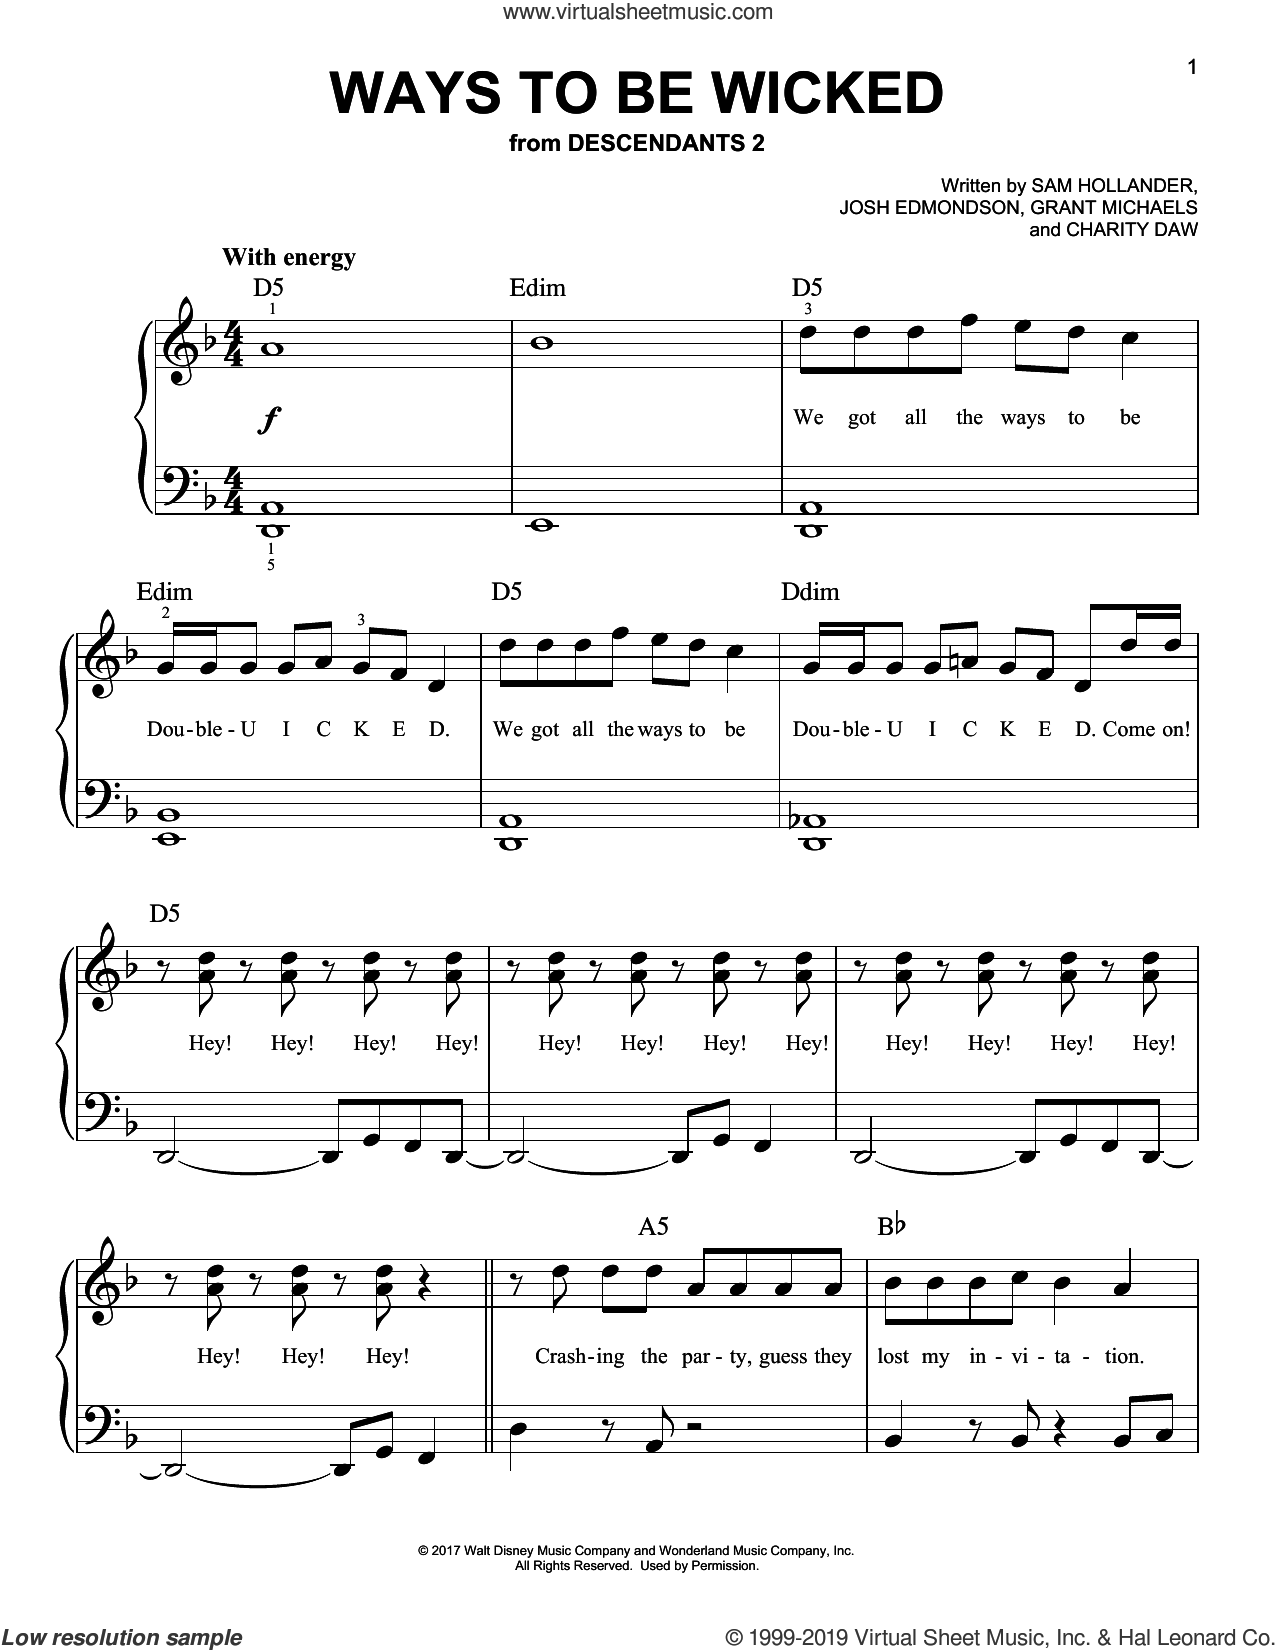 Sheet Music - Pender's Music Co.. Rotten To The Core (from Disney's  Descendants)